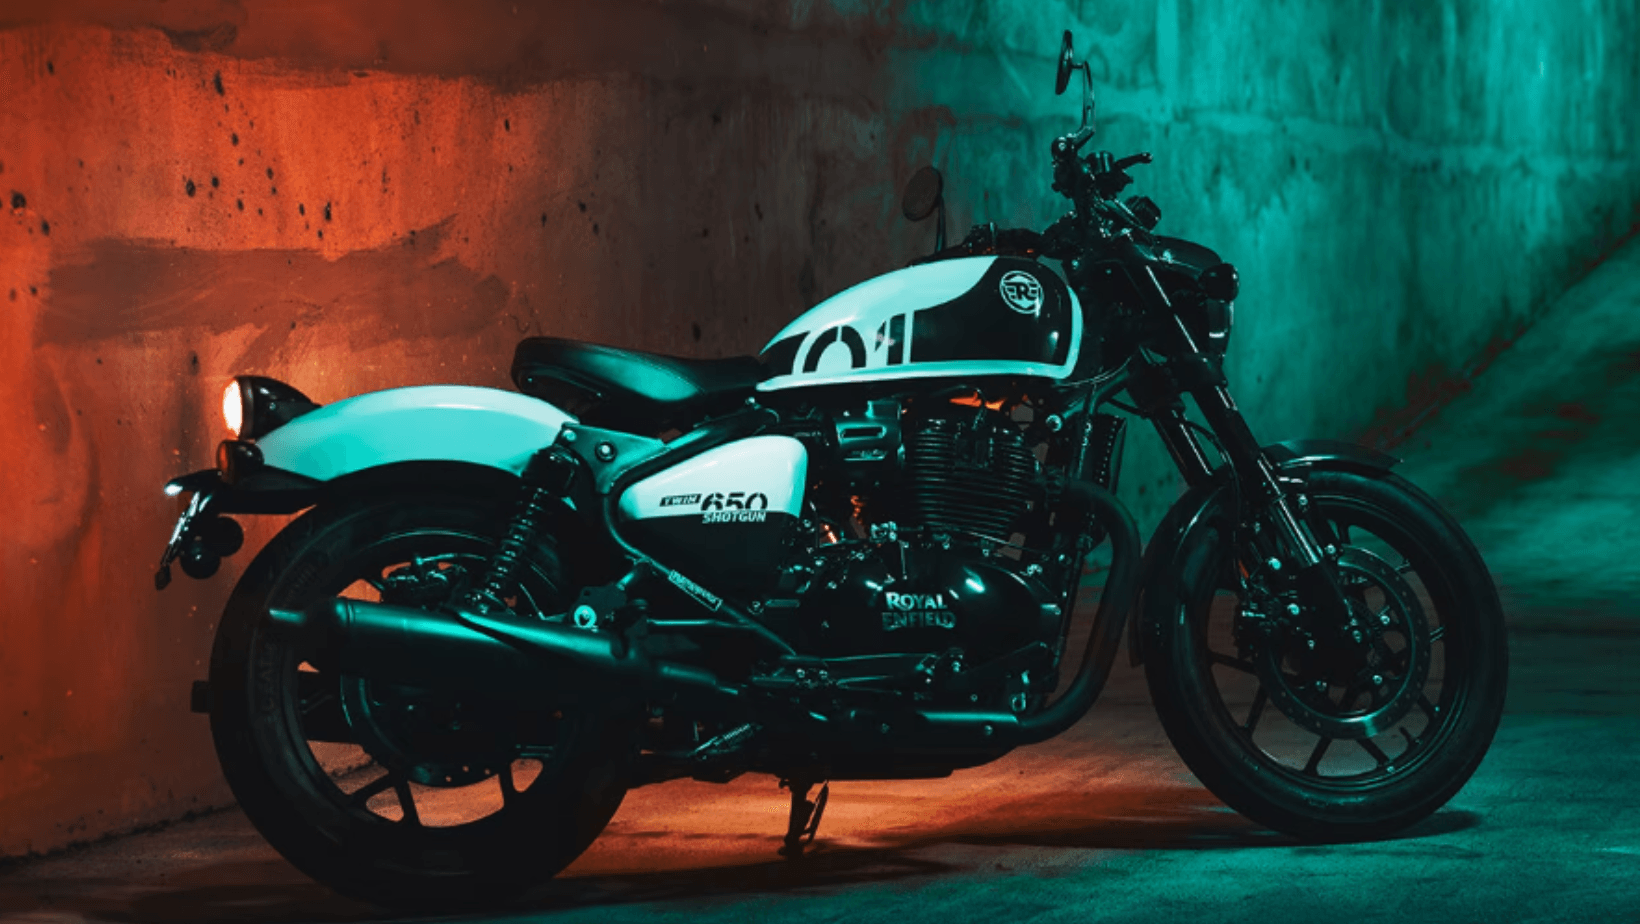 Royal Enfield Shotgun 650 Launched in India at Rs. 4.25 Lakh news